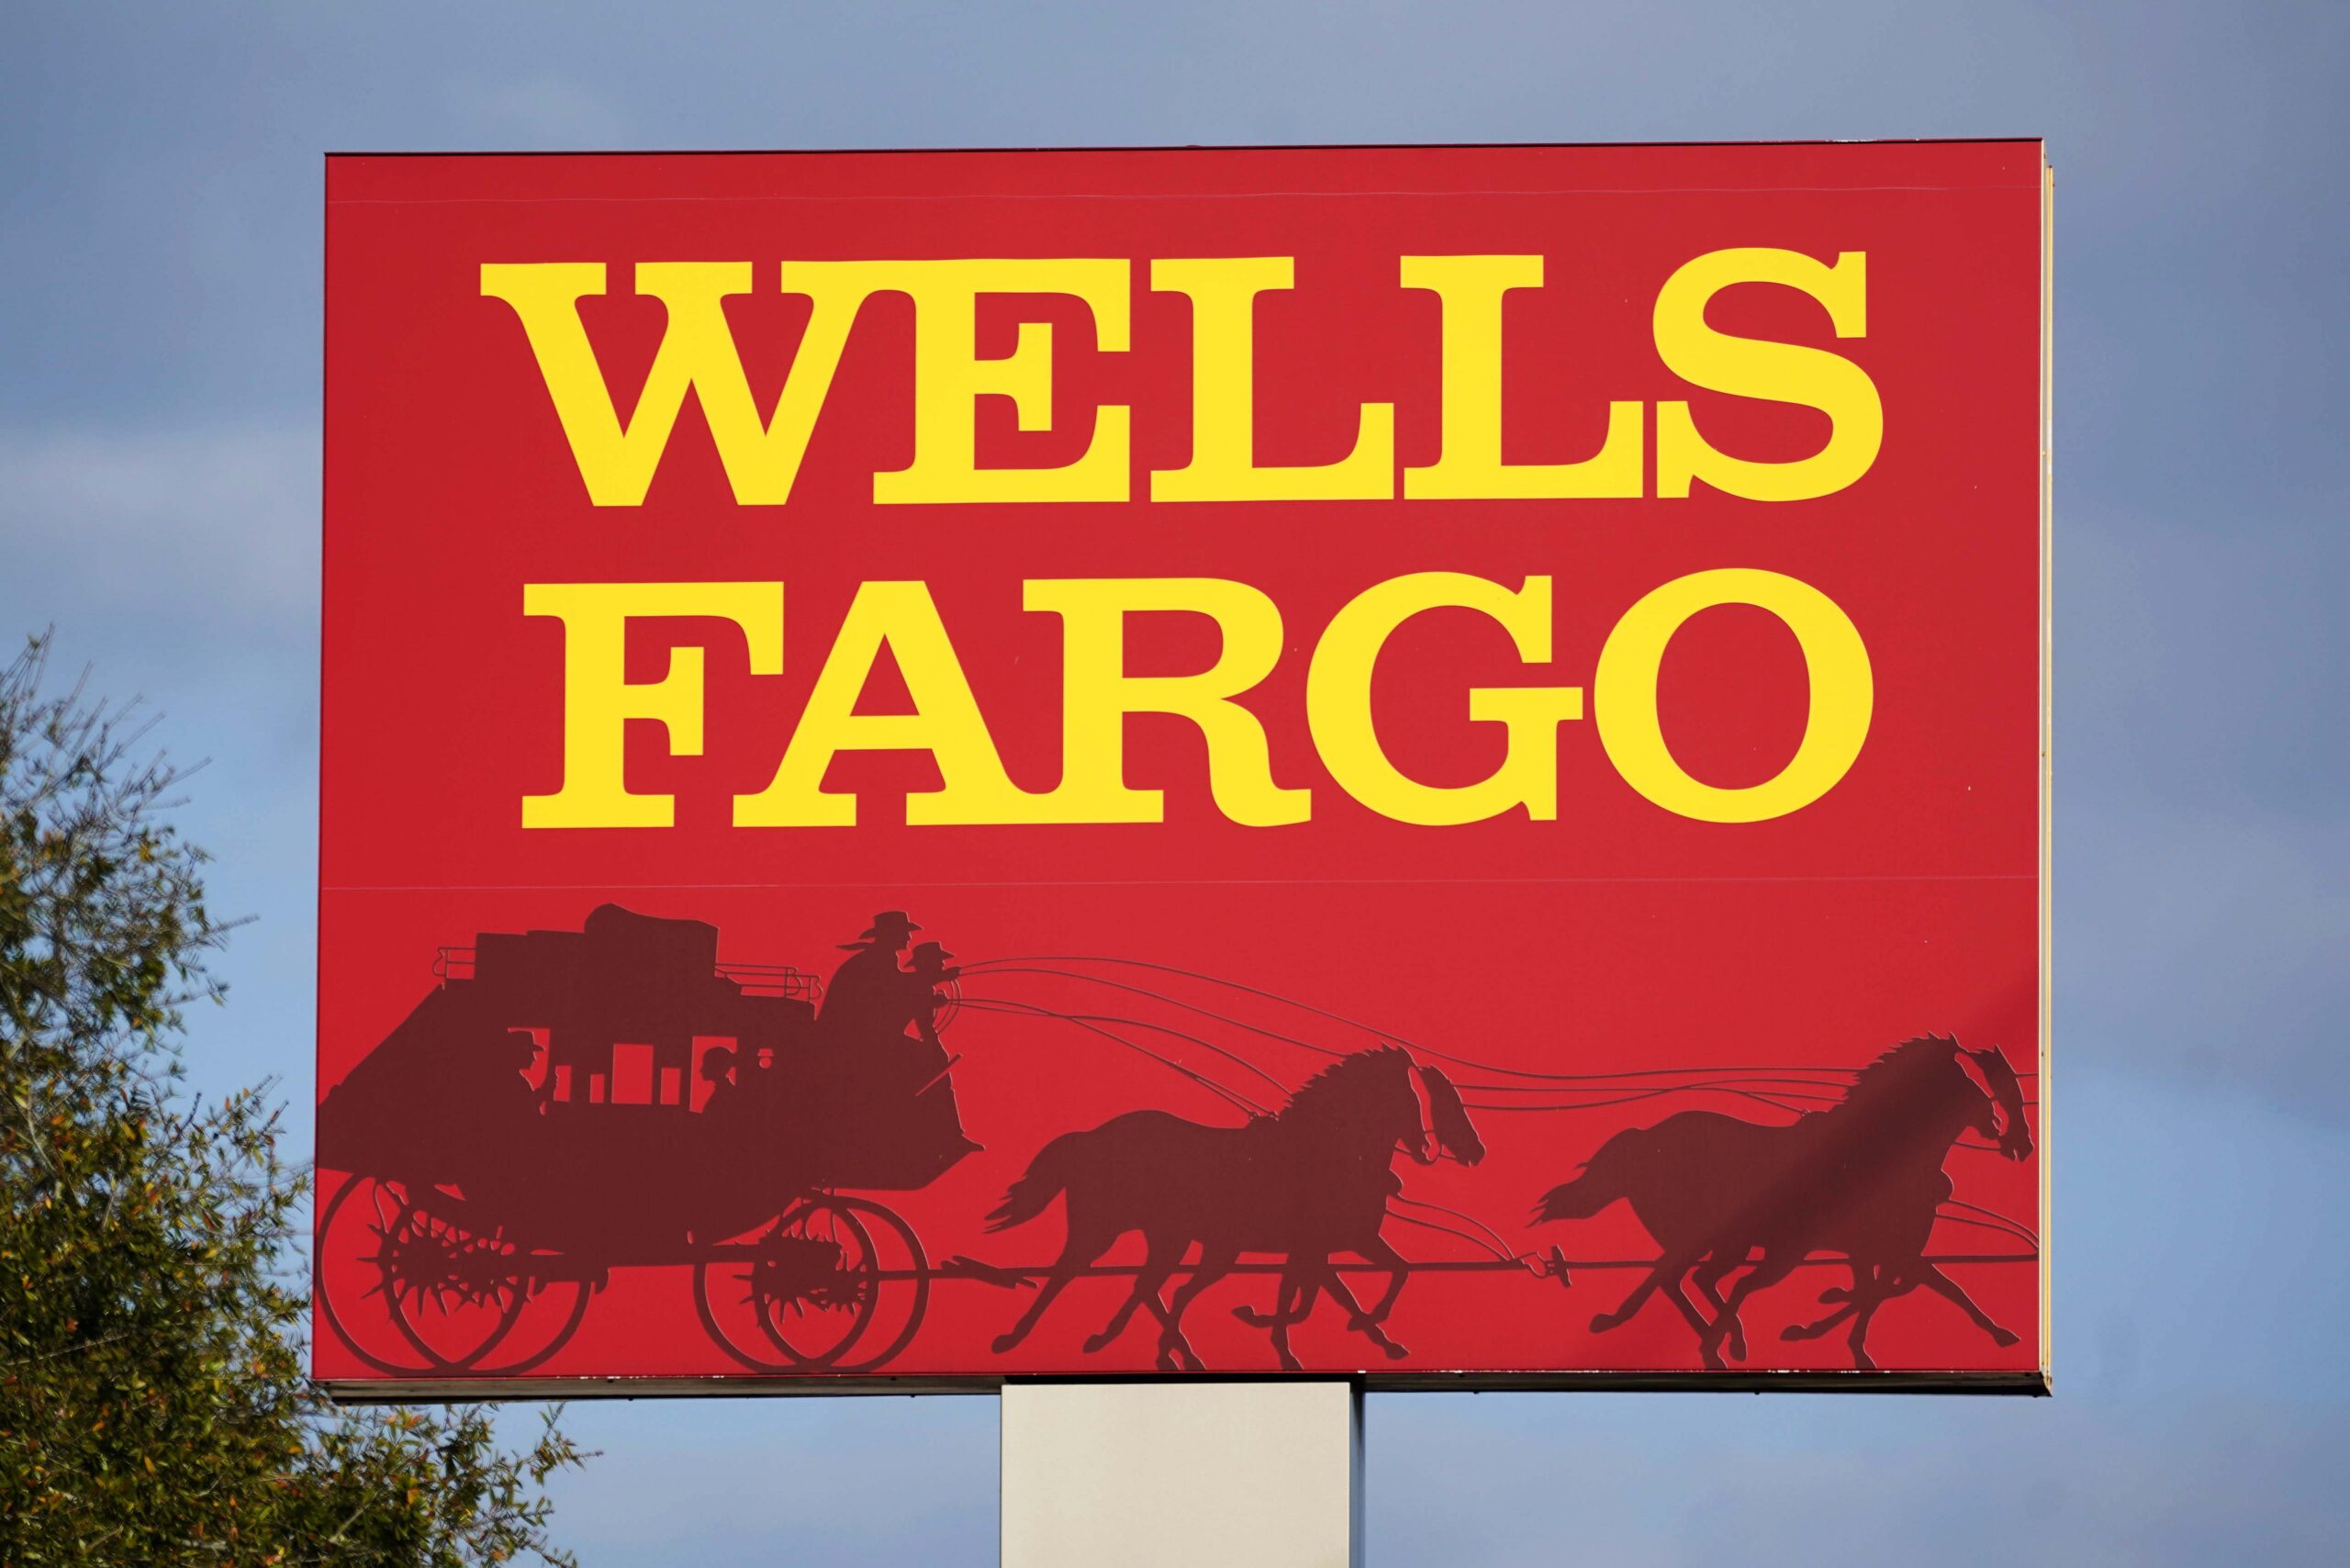 What is the wells fargo